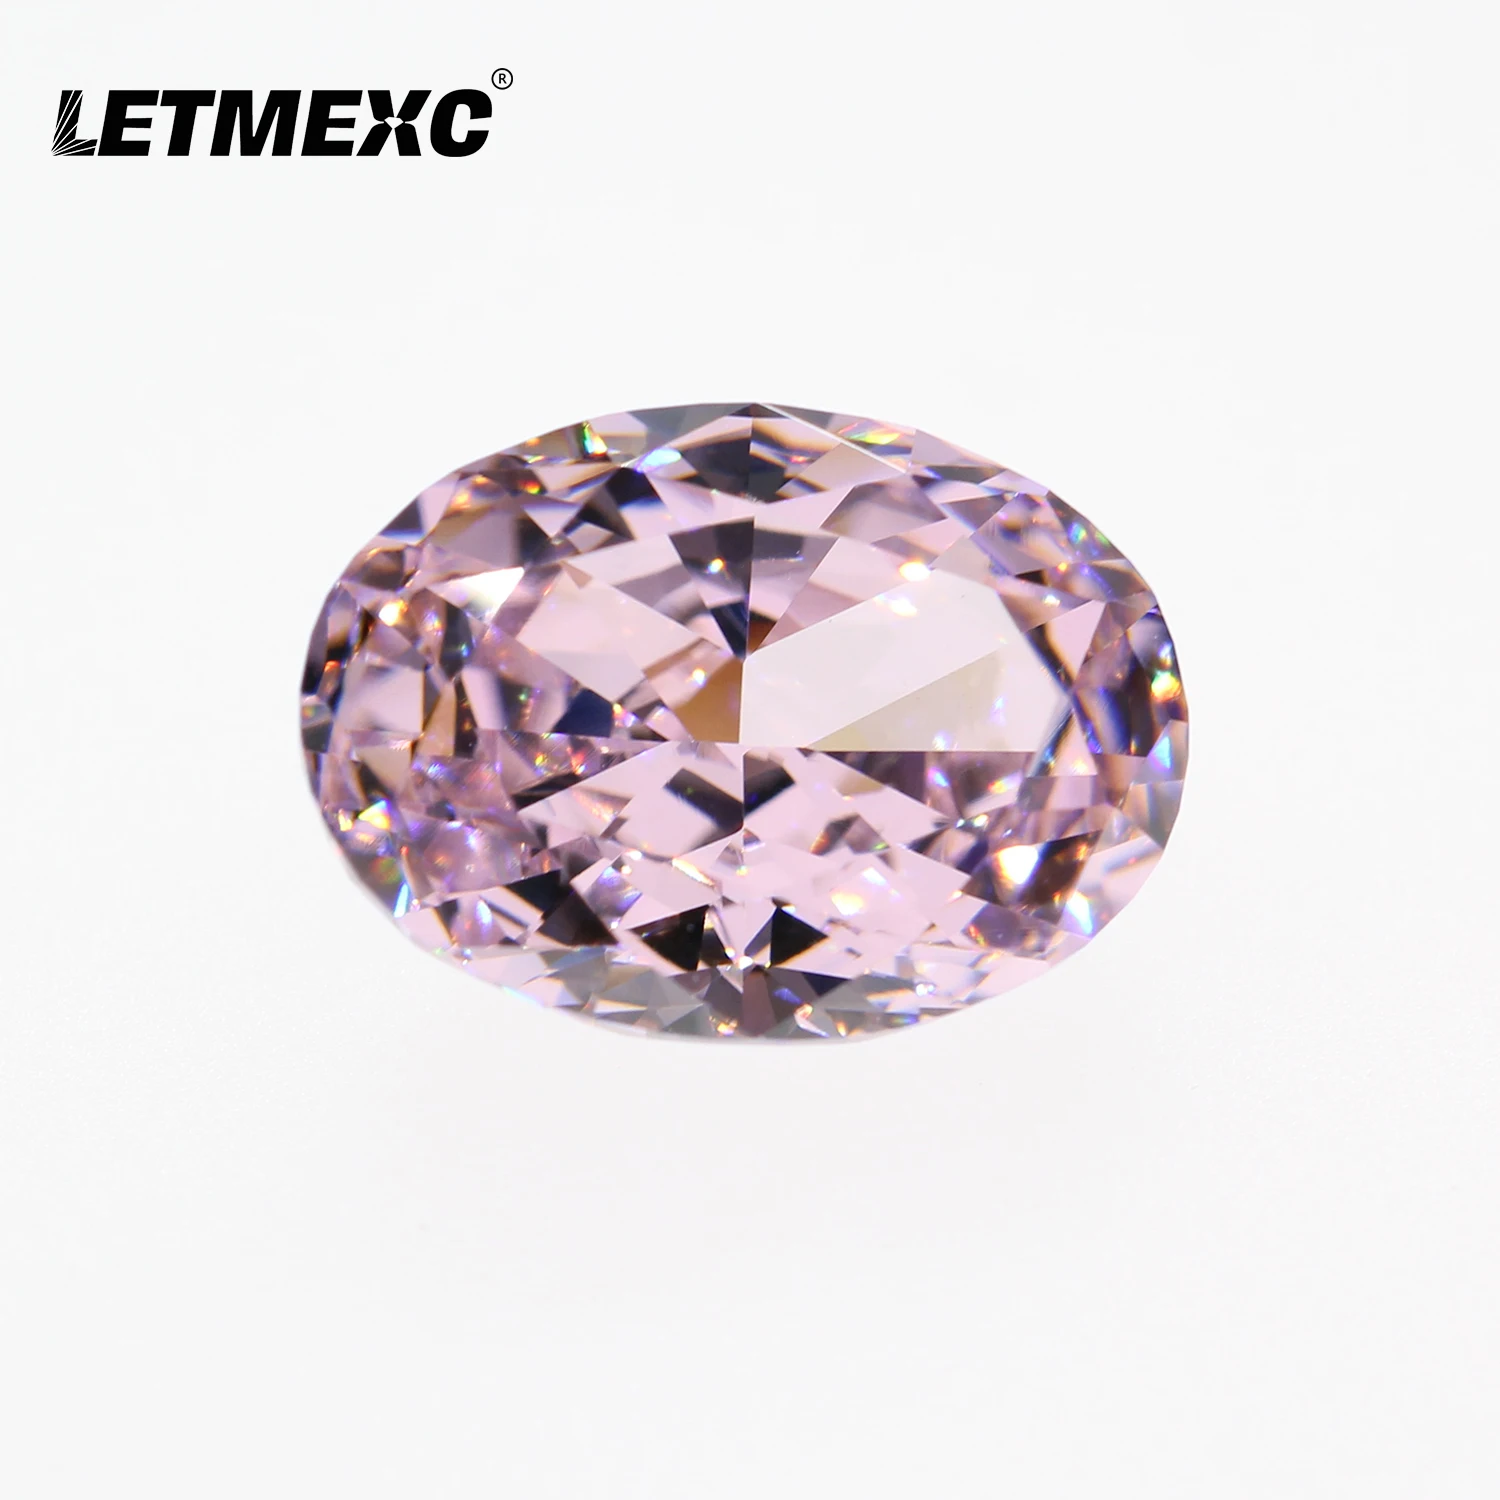 

Letmexc High Carbon Diamond New Cubic Zirconia Loose Stones CZ Gemstone 4K Oval Crushed Ice Cut Pink Color